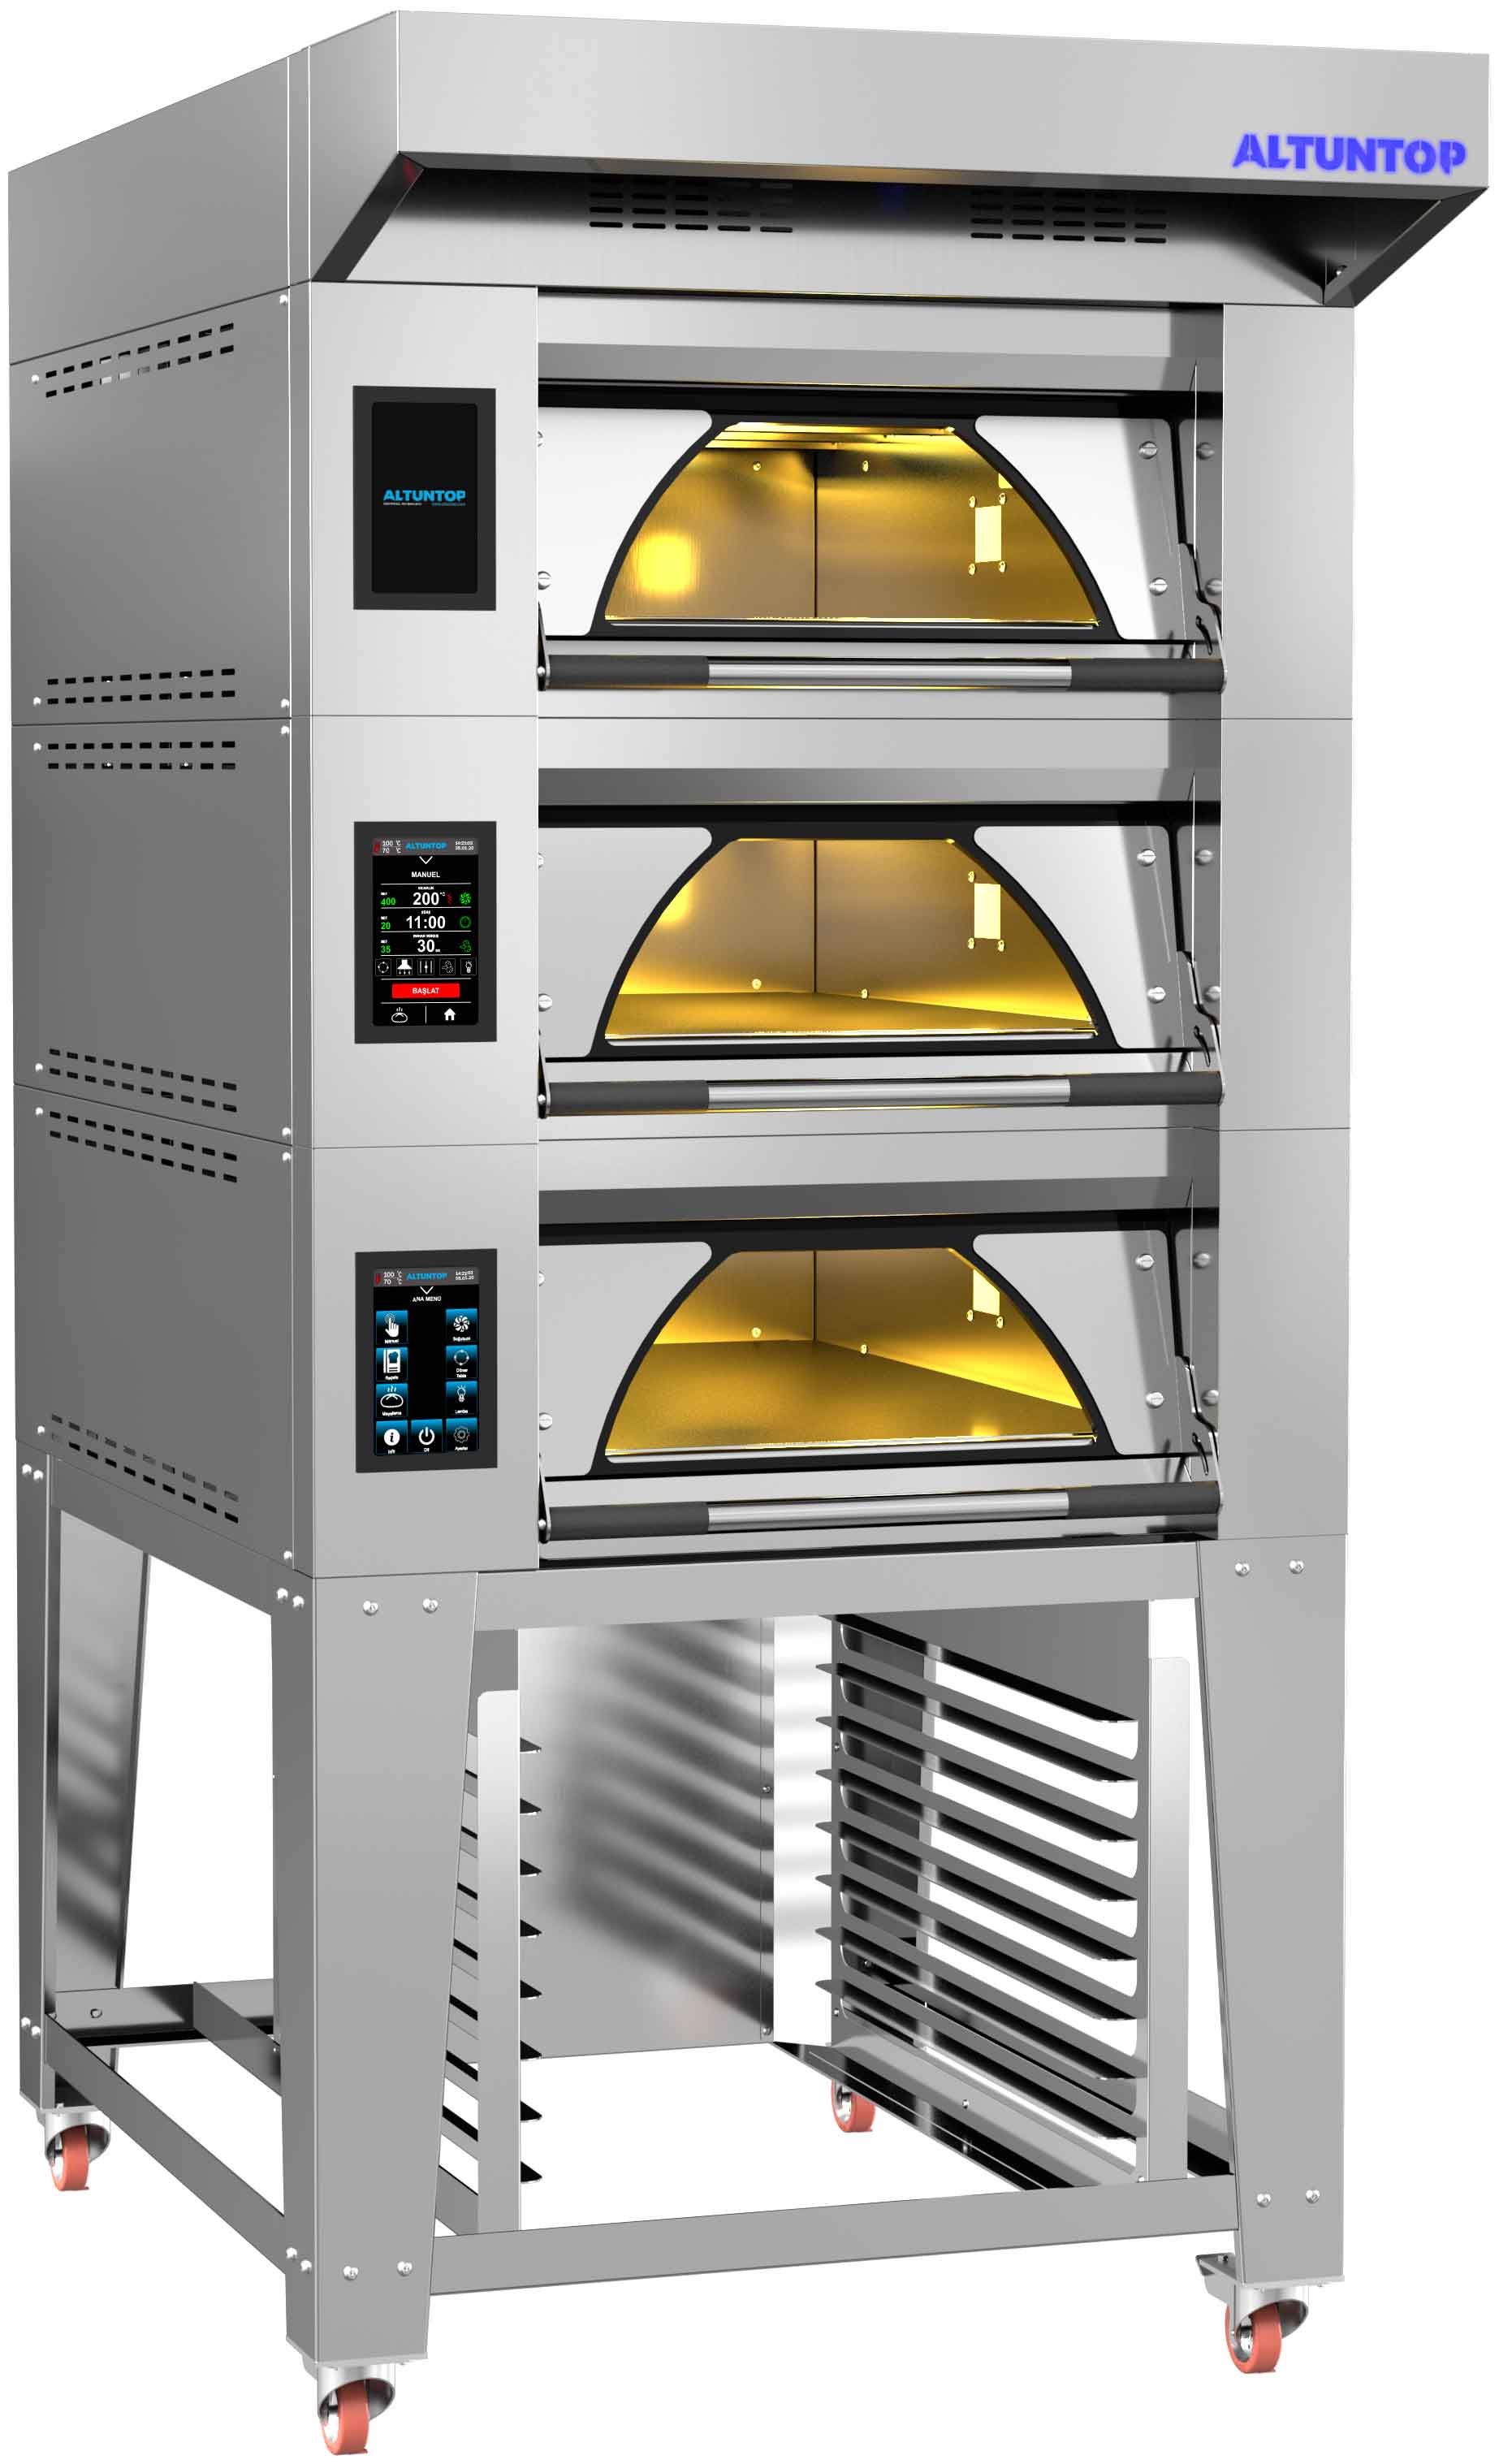 ELECTRICAL DECK OVEN 